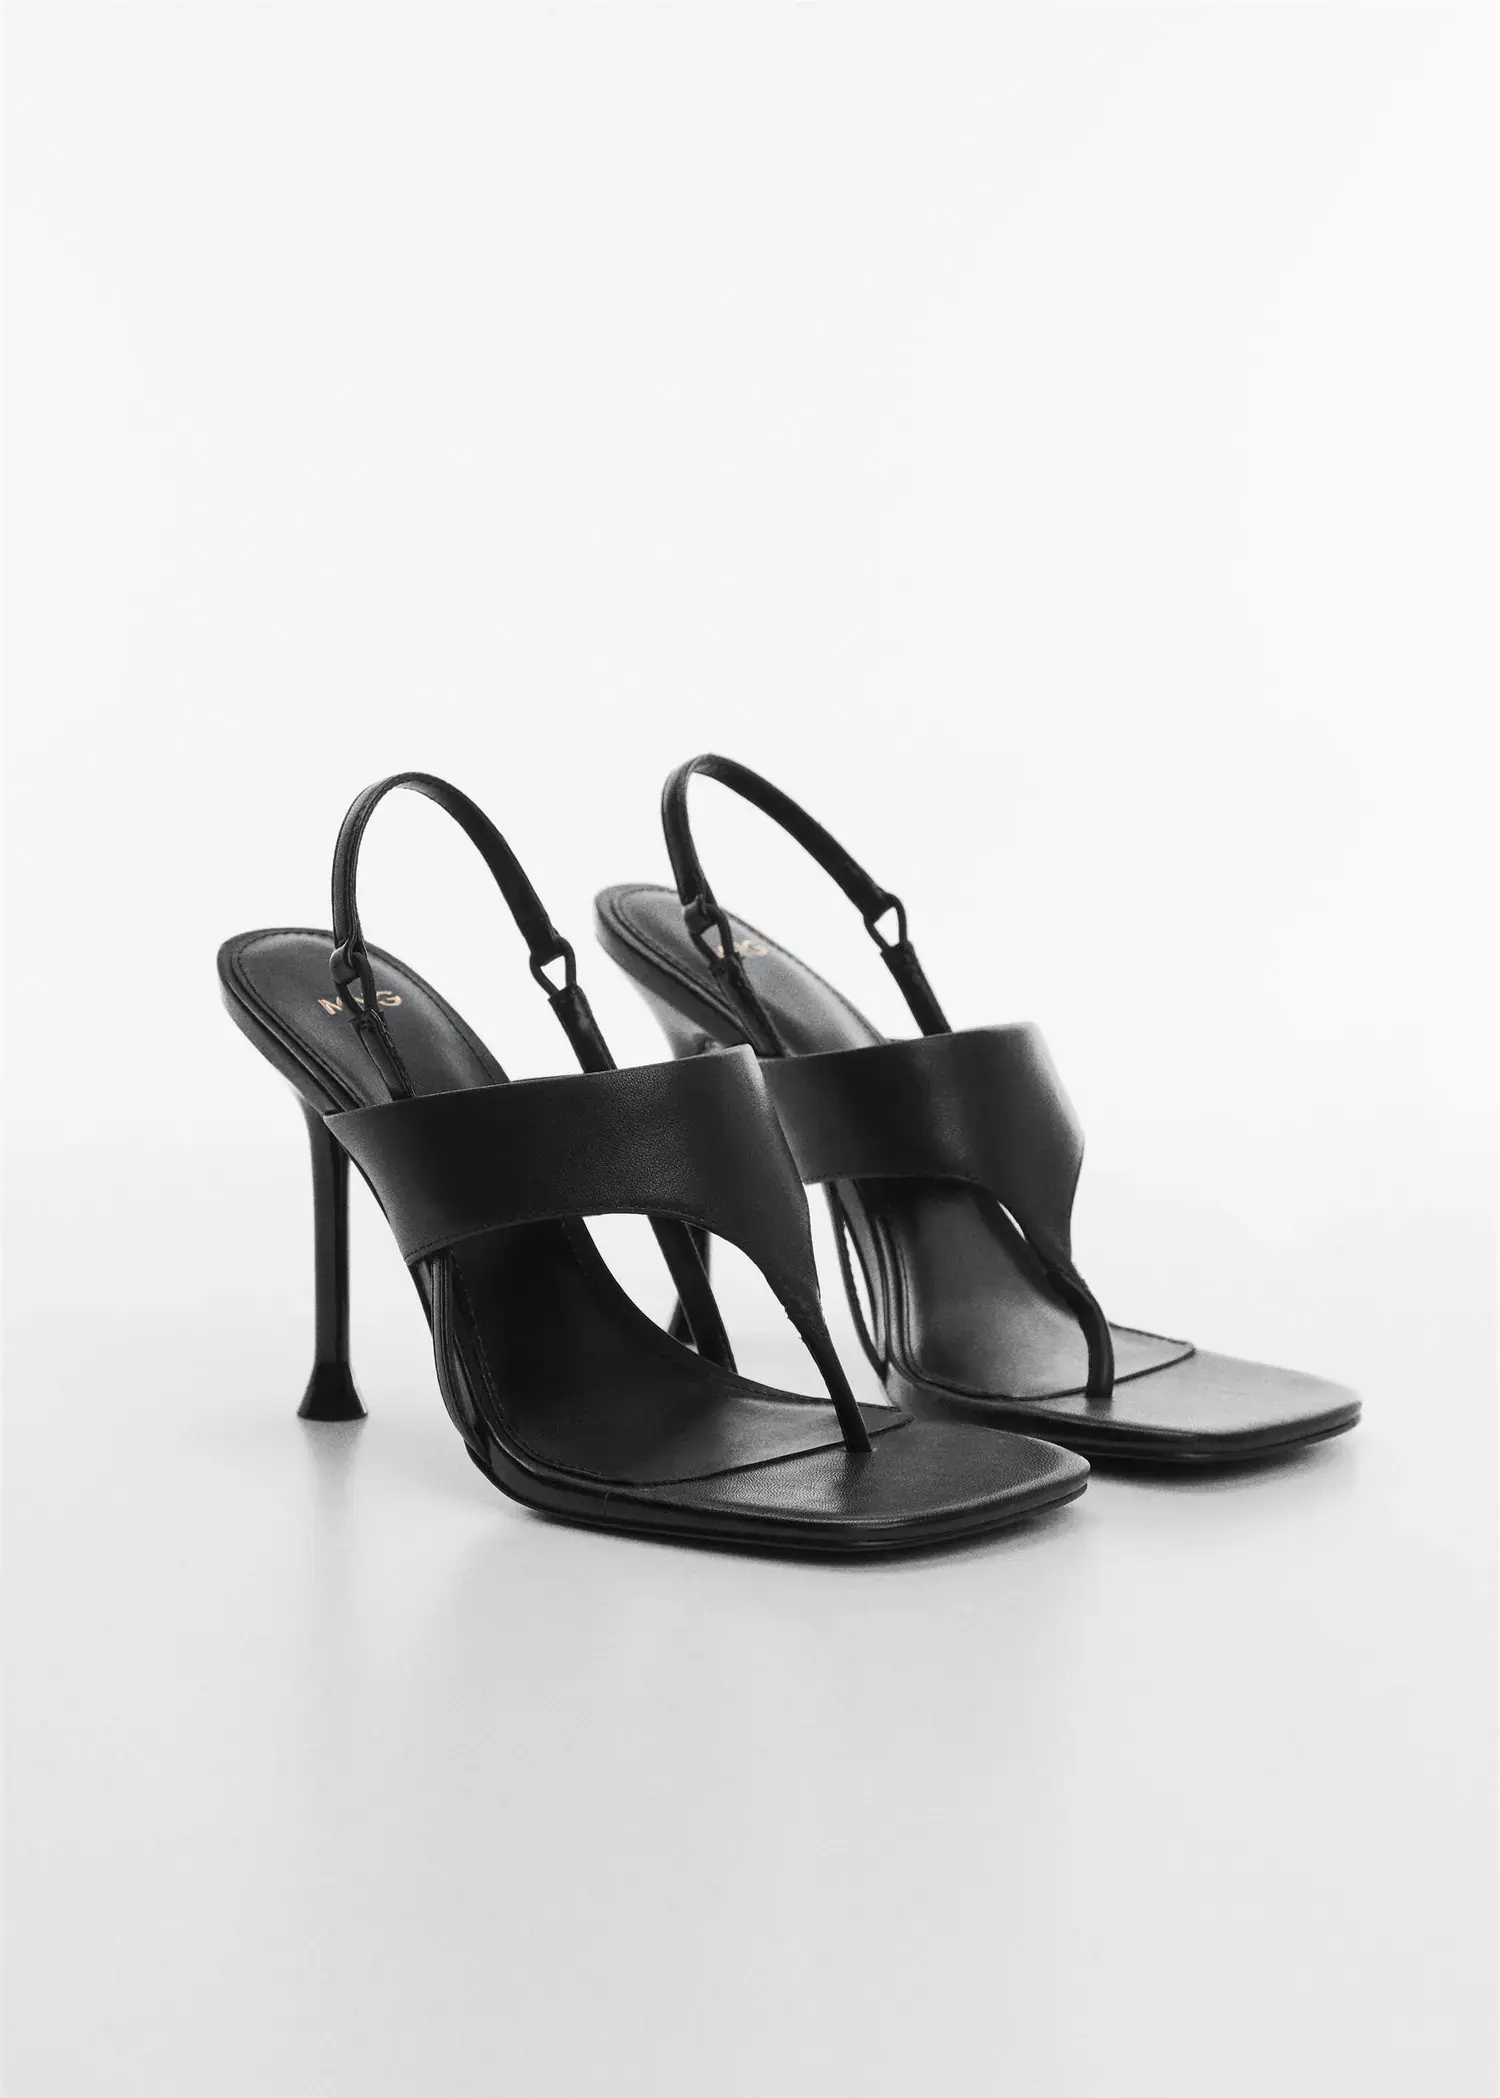 Mango Heeled leather sandals with straps. a pair of high heeled sandals on a white surface. 